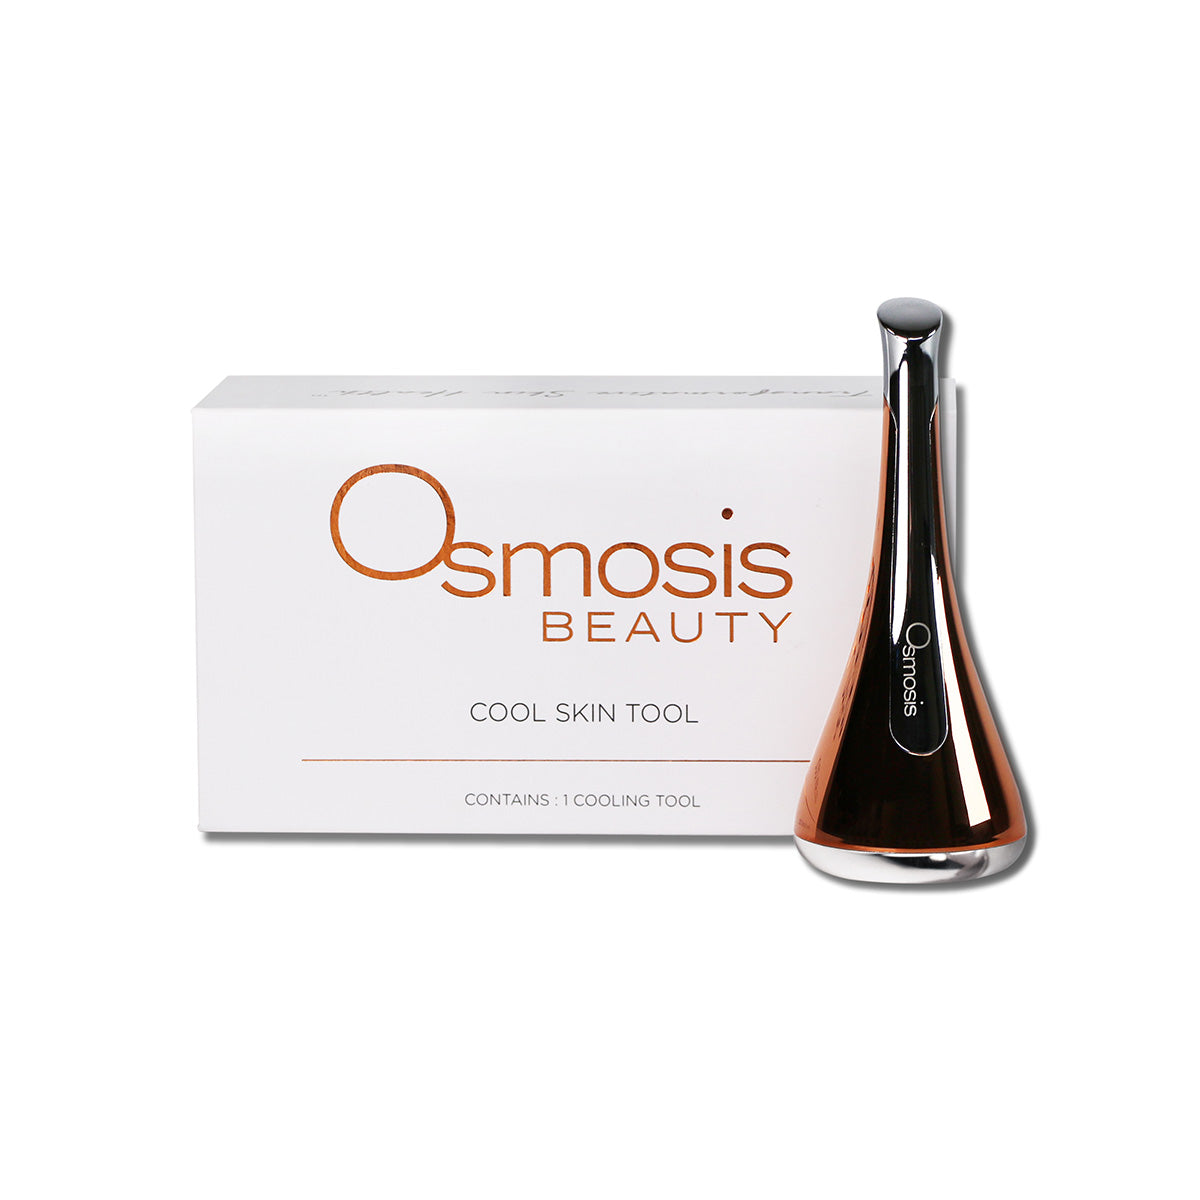 Osmosis Skincare Cool Skin Tool helps reduce redness and irritation